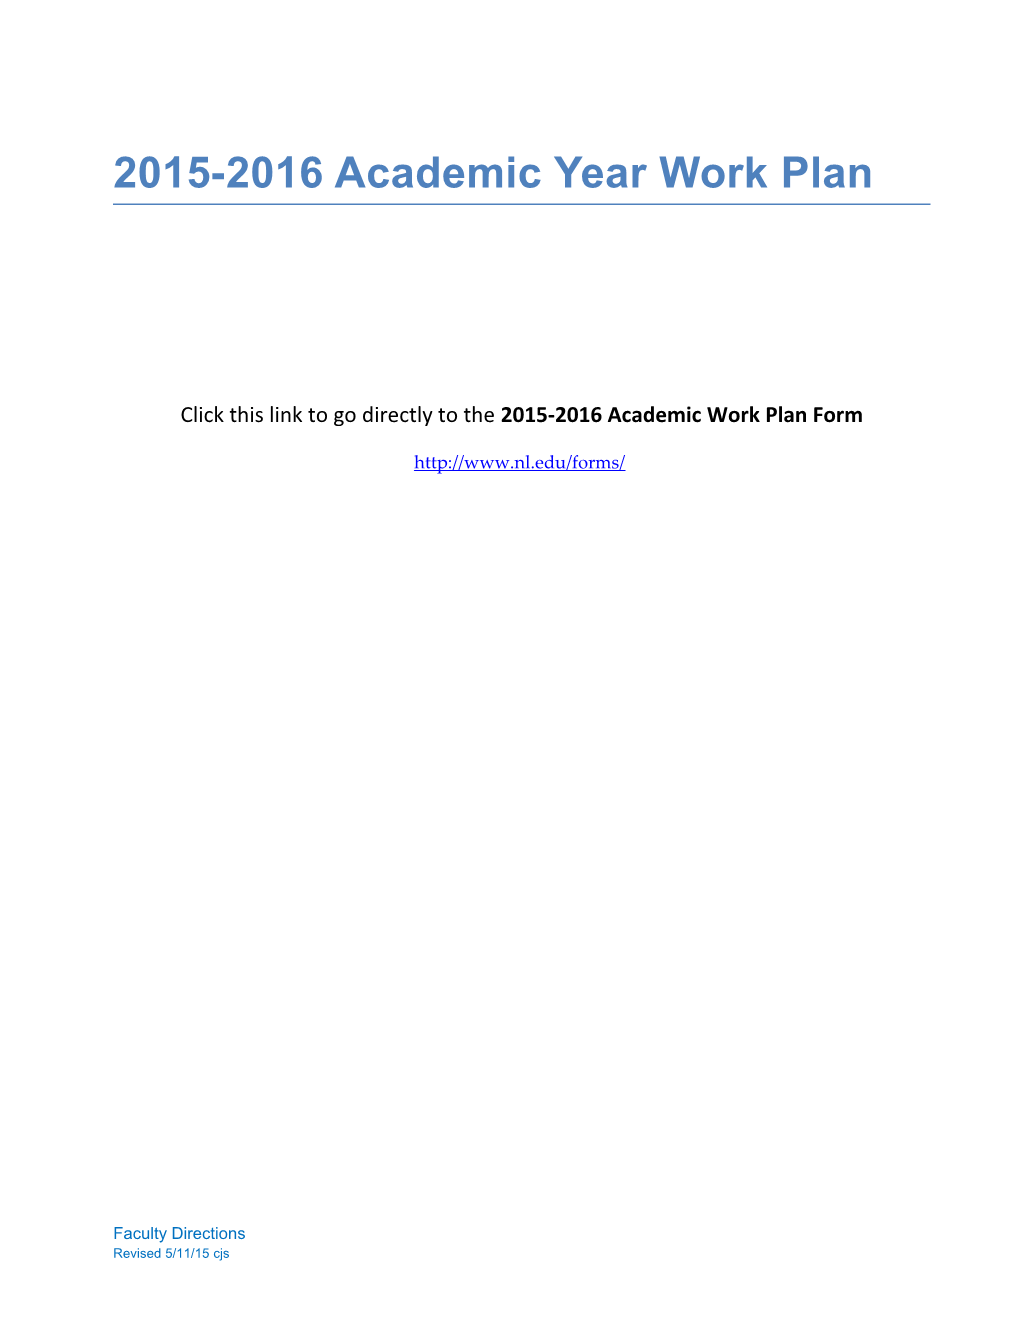 Click This Link to Go Directly to the 2015-2016 Academic Work Plan Form